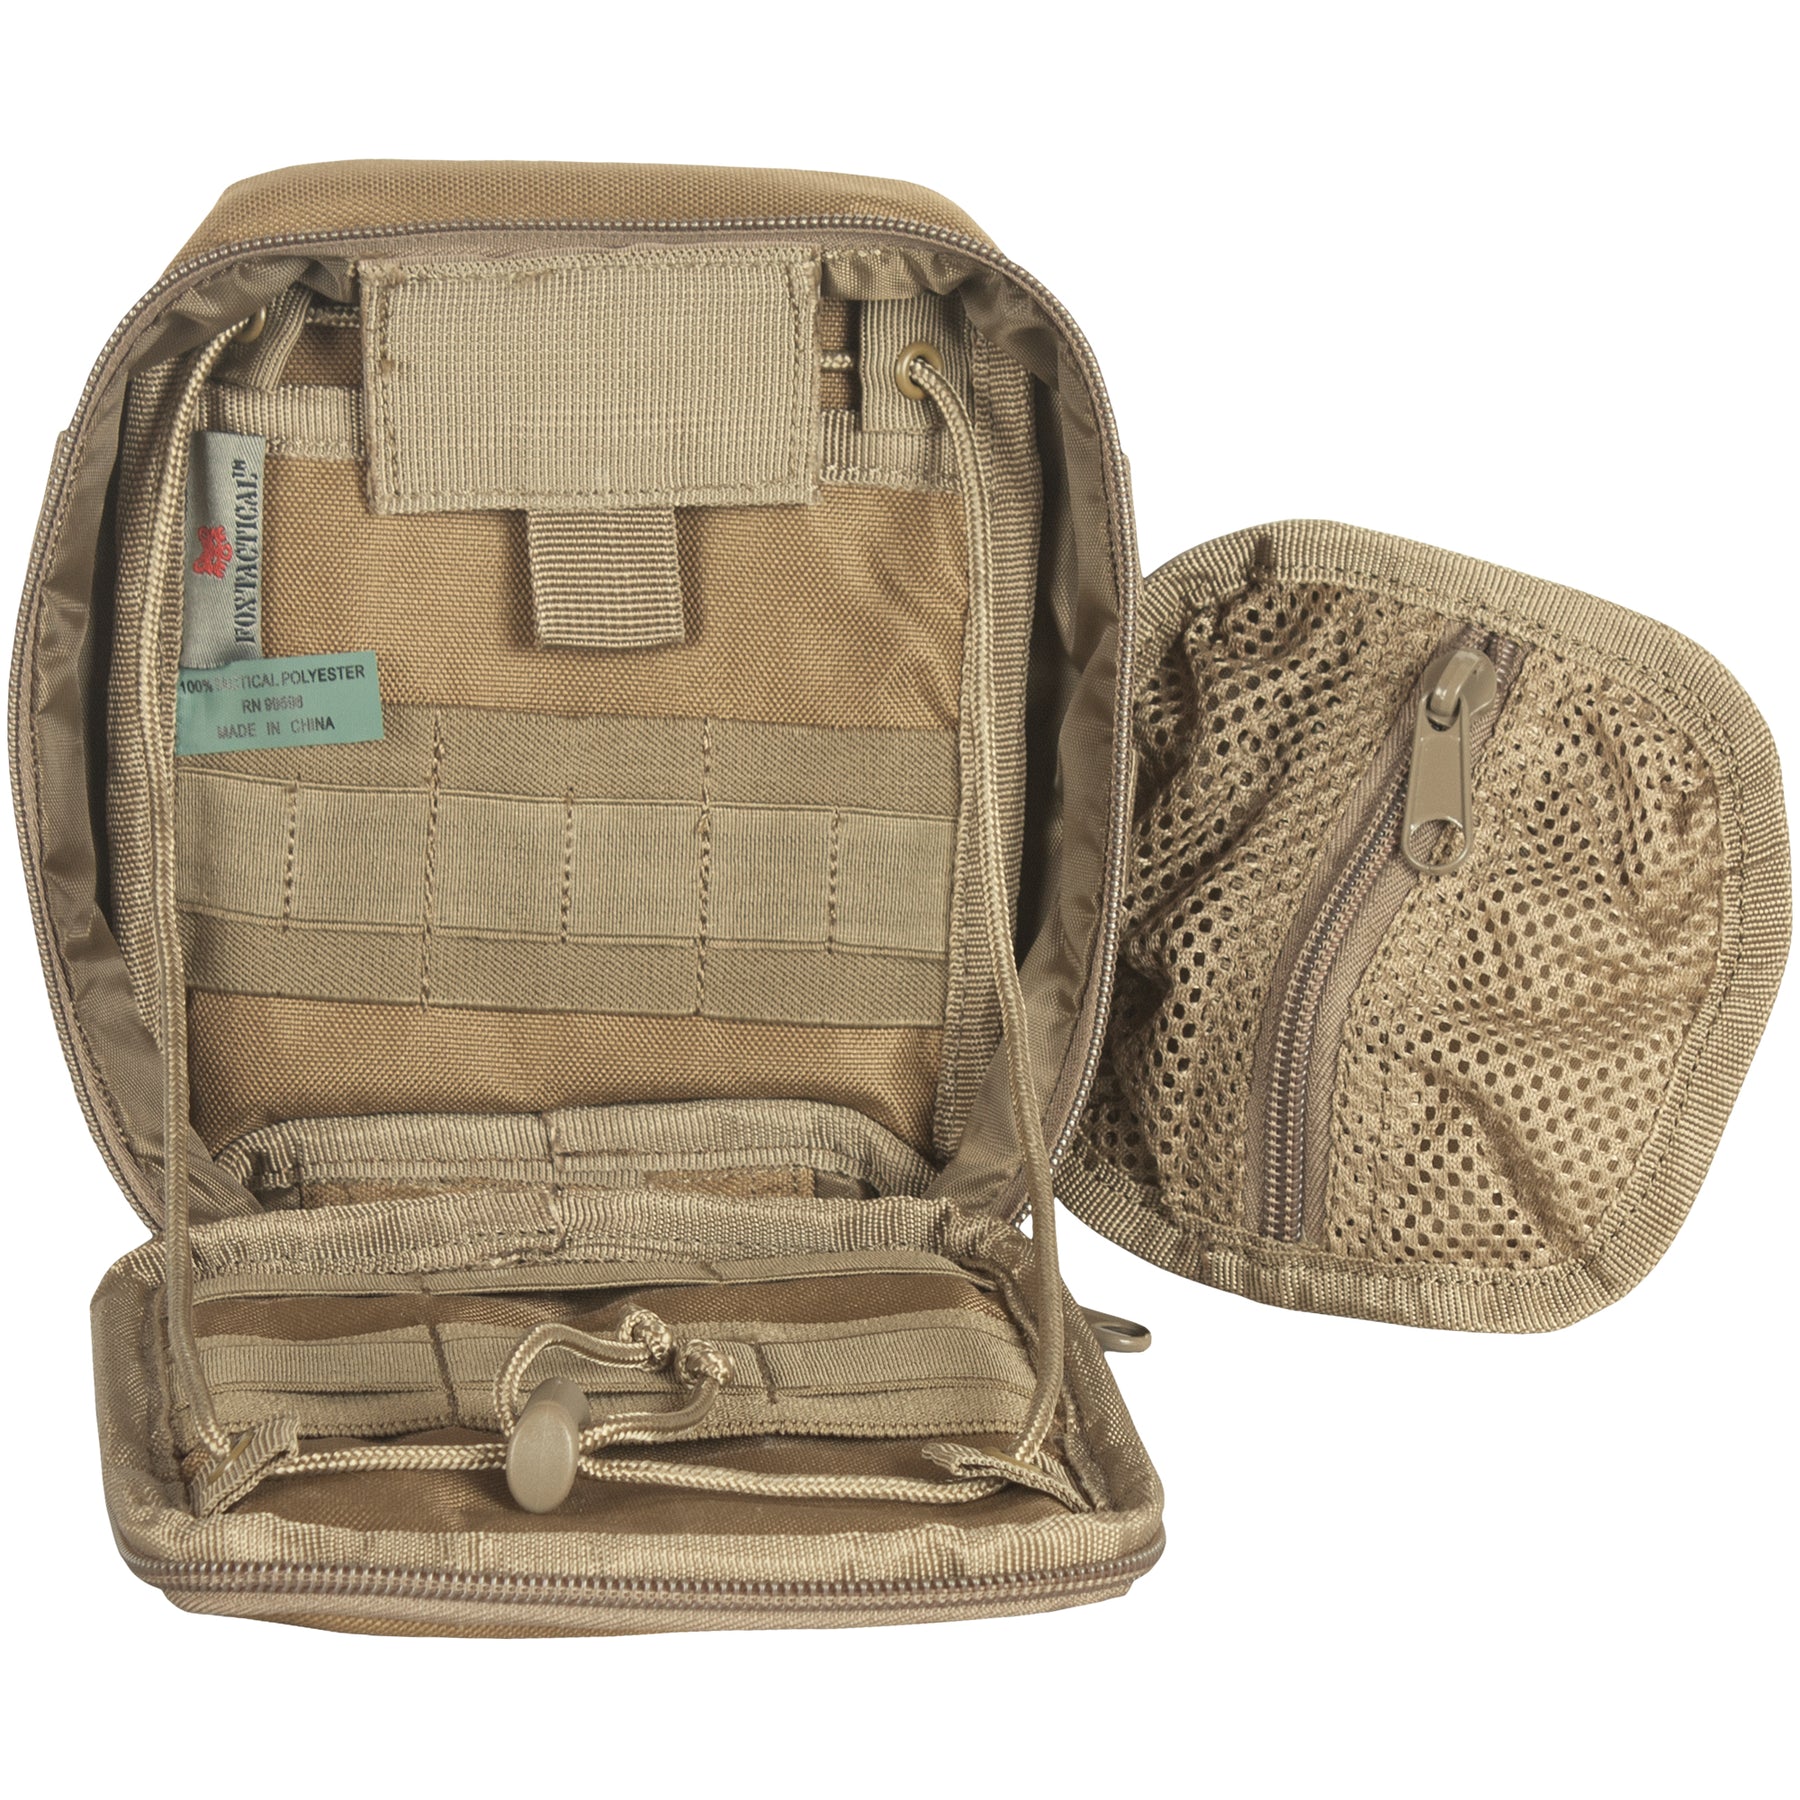 Open Multi-Field Tool and Accessory Pouch with interior mesh pouch removed. 